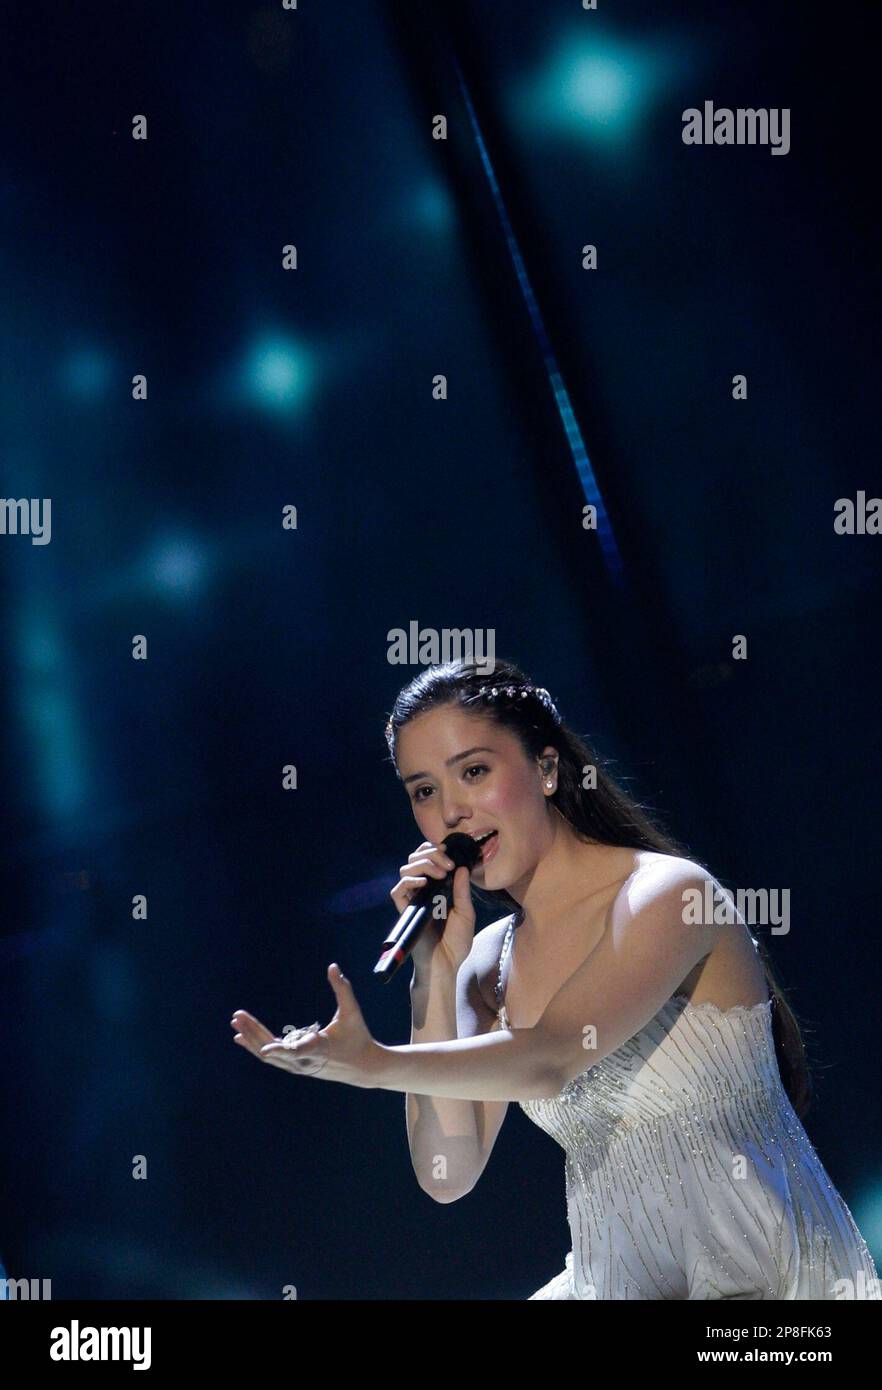 Christina Metaxa of Cyprus performs during the second semi-final rehearsals  for the Eurovision Song Contest in Moscow May 13, 2009. REUTERS/Sergei  Karpukhin (RUSSIA ENTERTAINMENT Stock Photo - Alamy